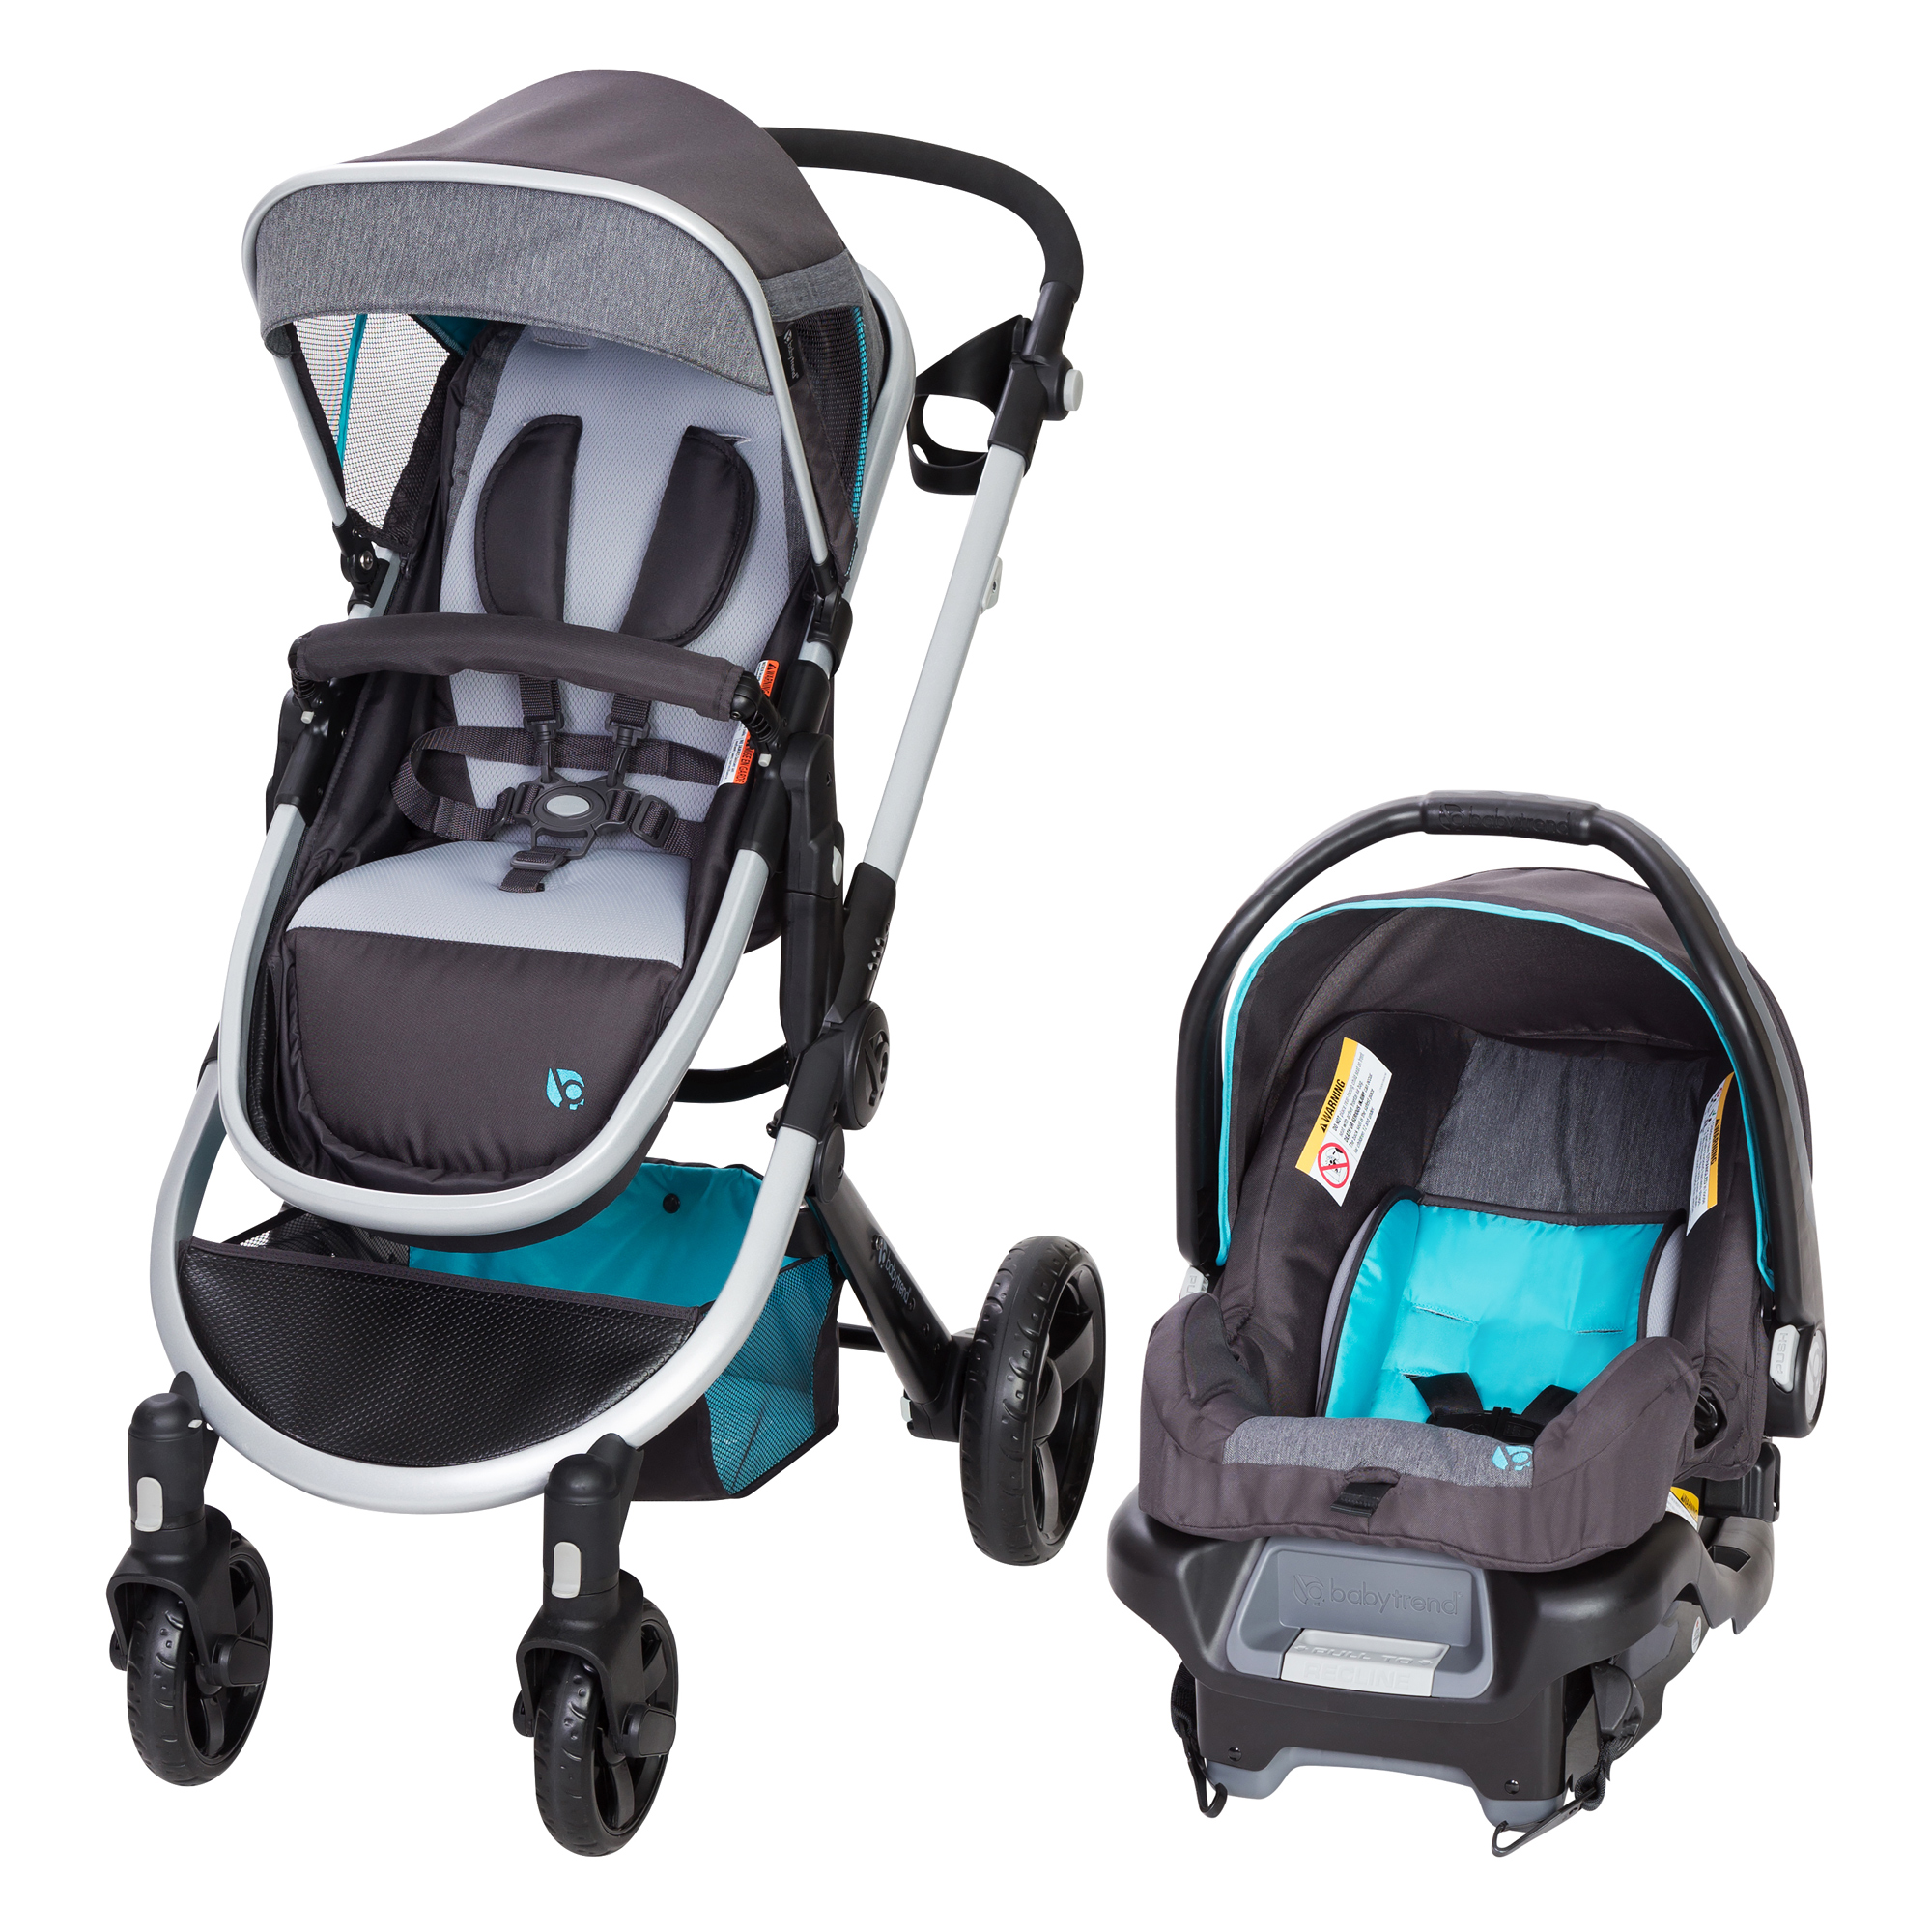 Baby Trend Espy Travel System Stroller, Paramount - image 1 of 6